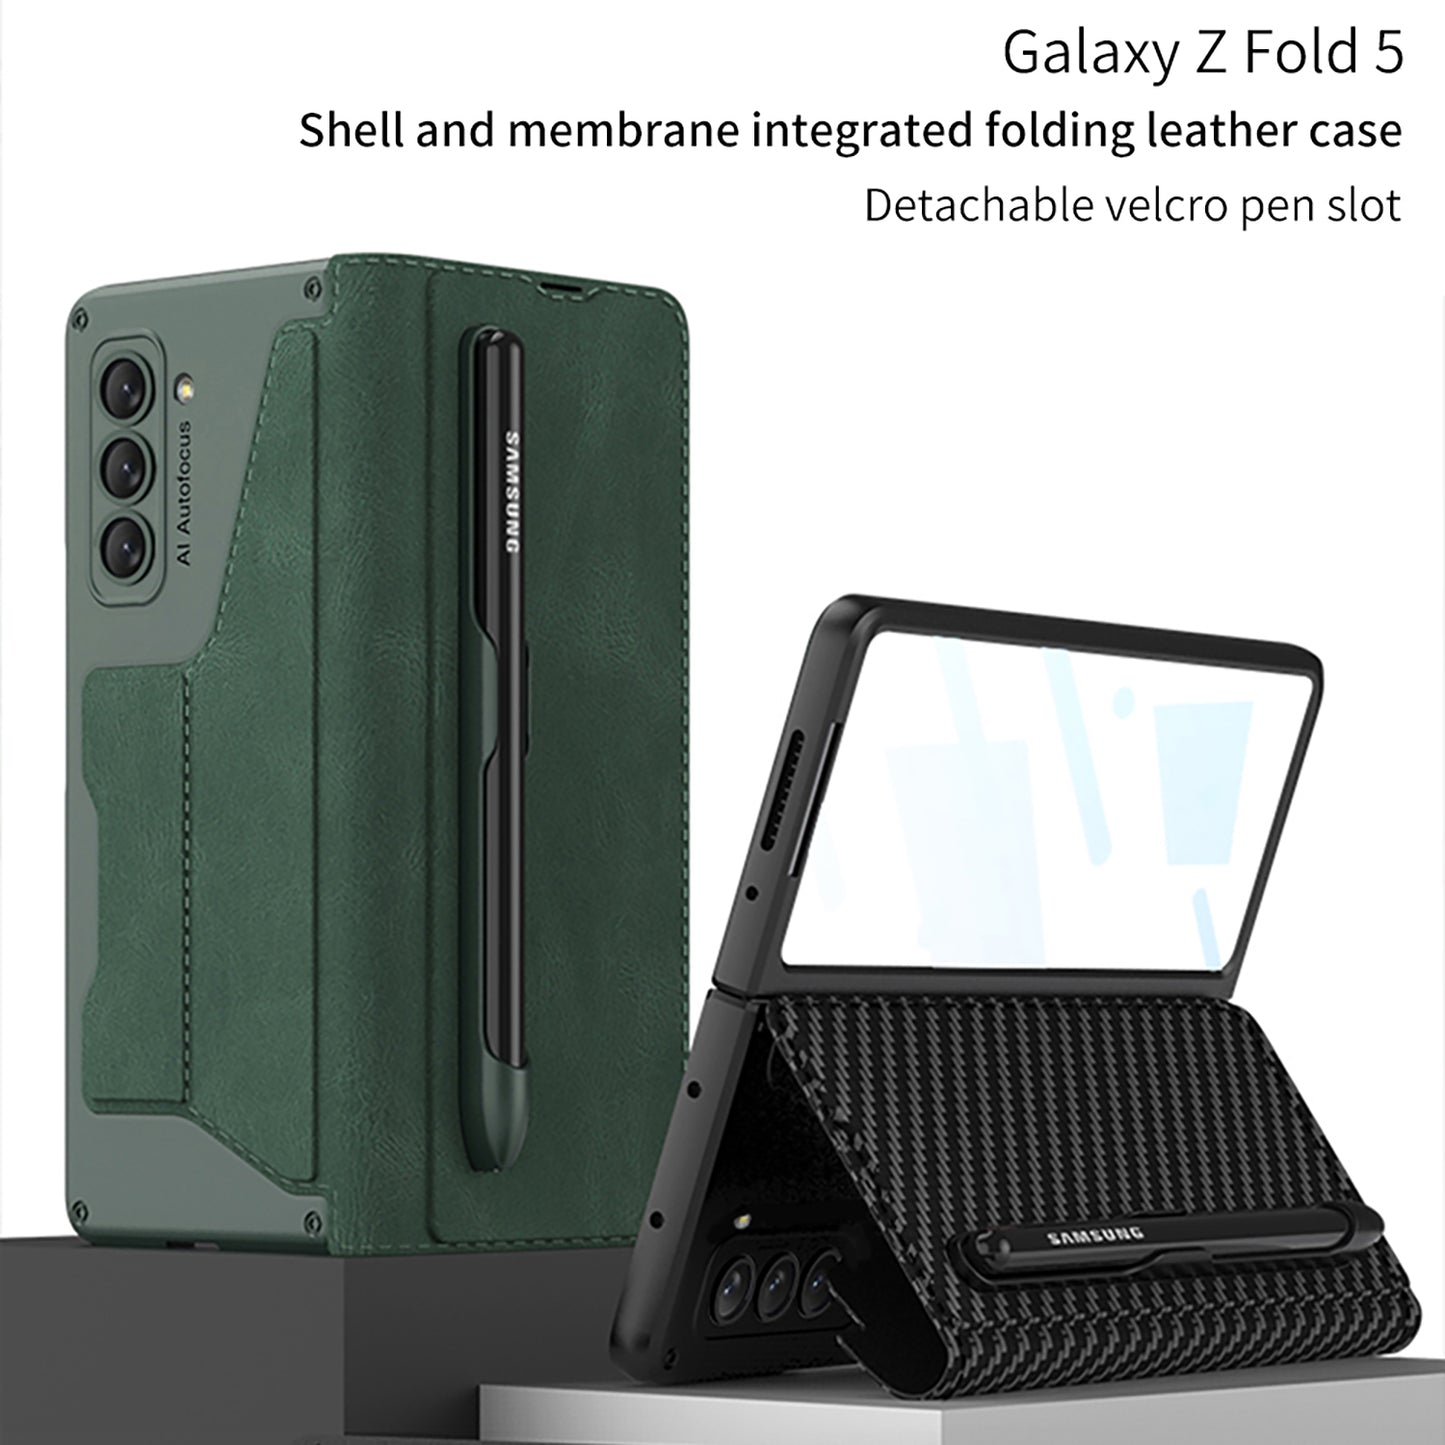 Leather Pen Holder Armor Phone Case With Back Screen Protector For Samsung Galaxy Z Fold5 Fold4 - Mycasety Mycasety